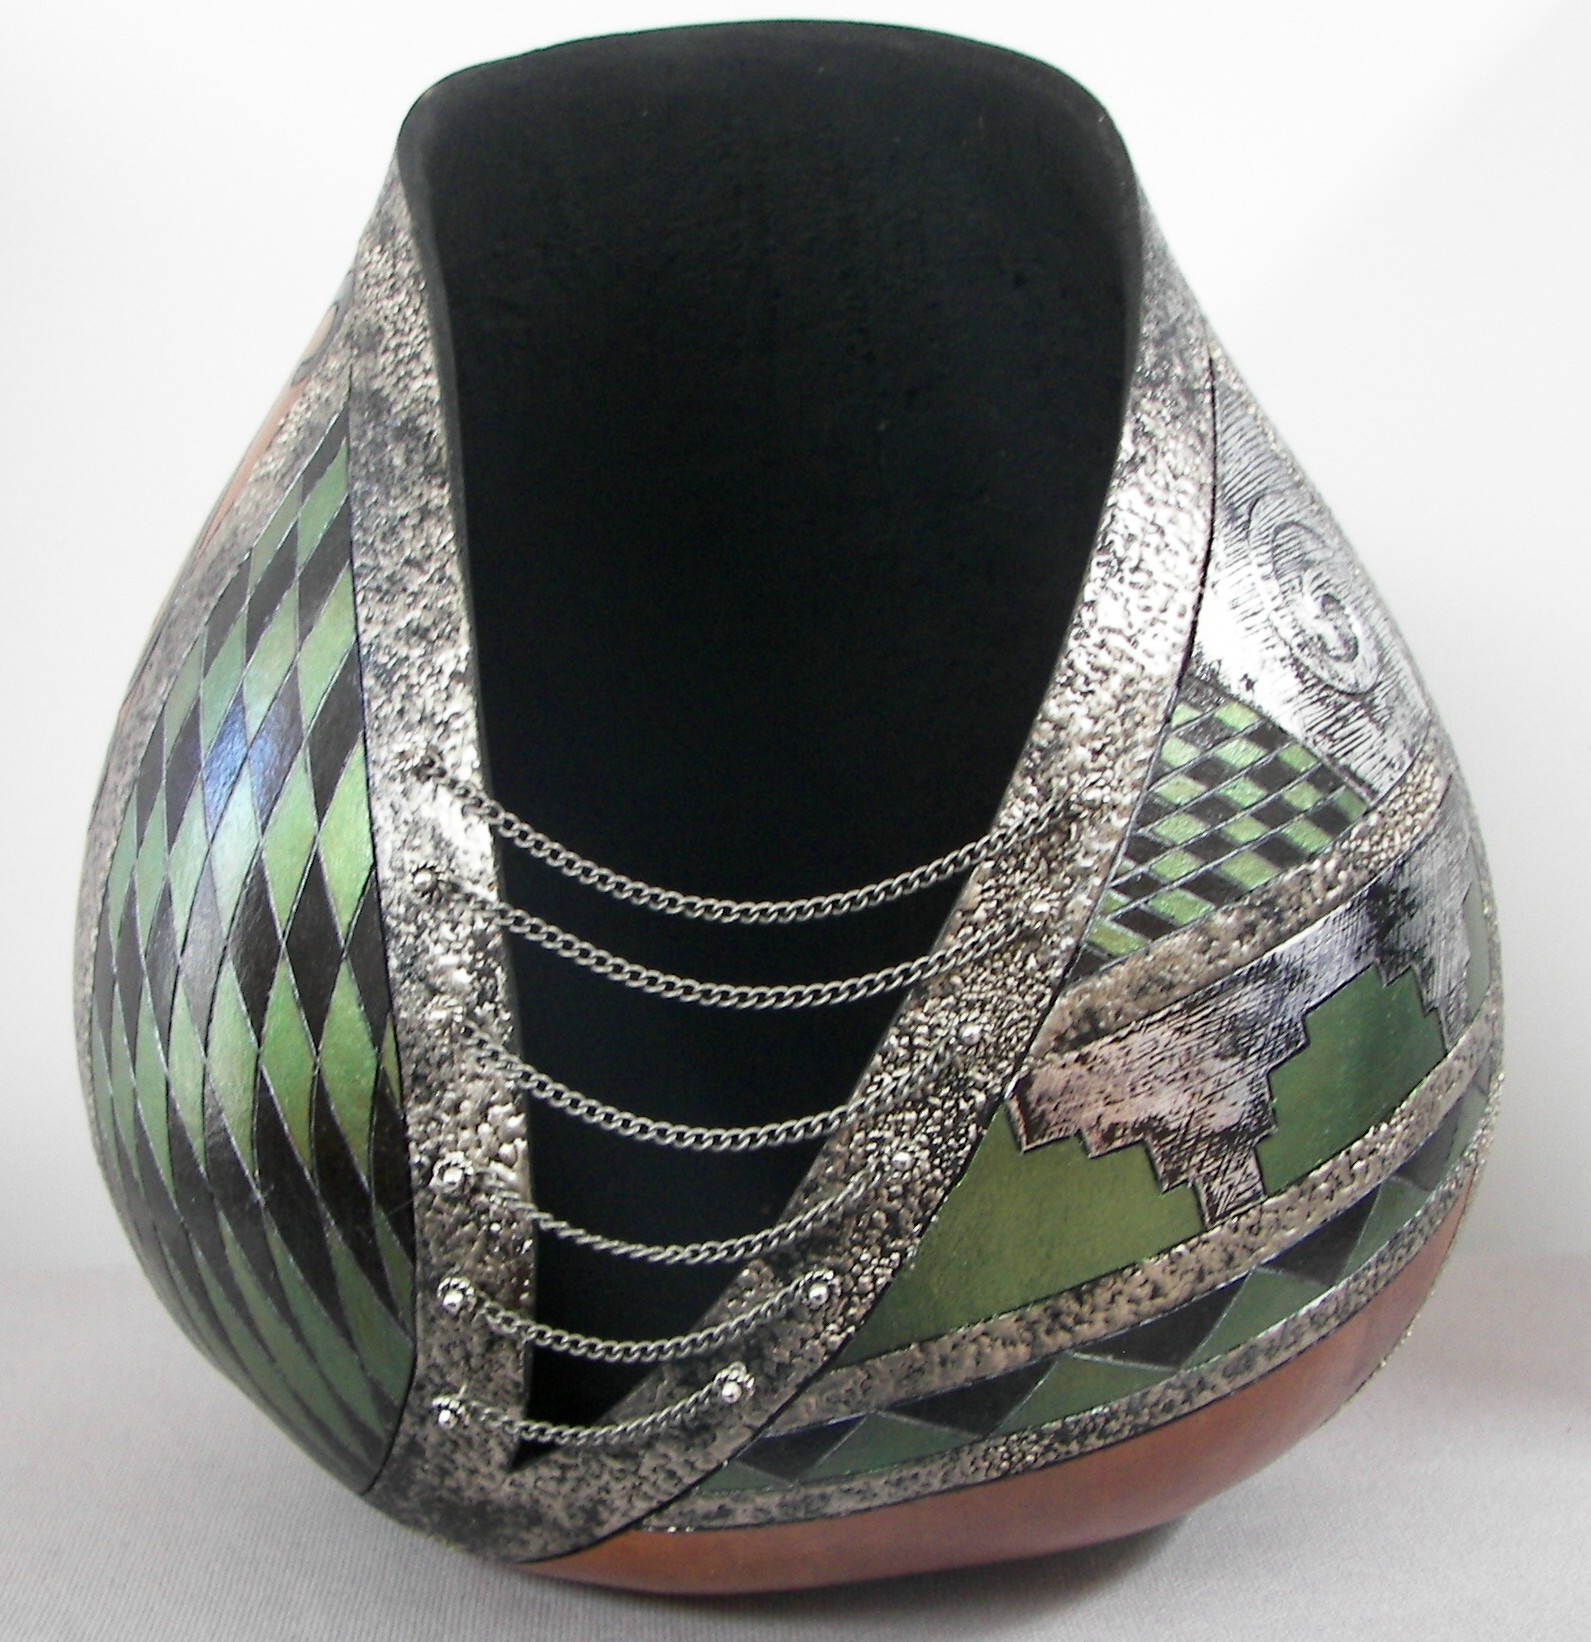 Gourd-with-Silver-Tape-and-Olive-Green-3-19-16